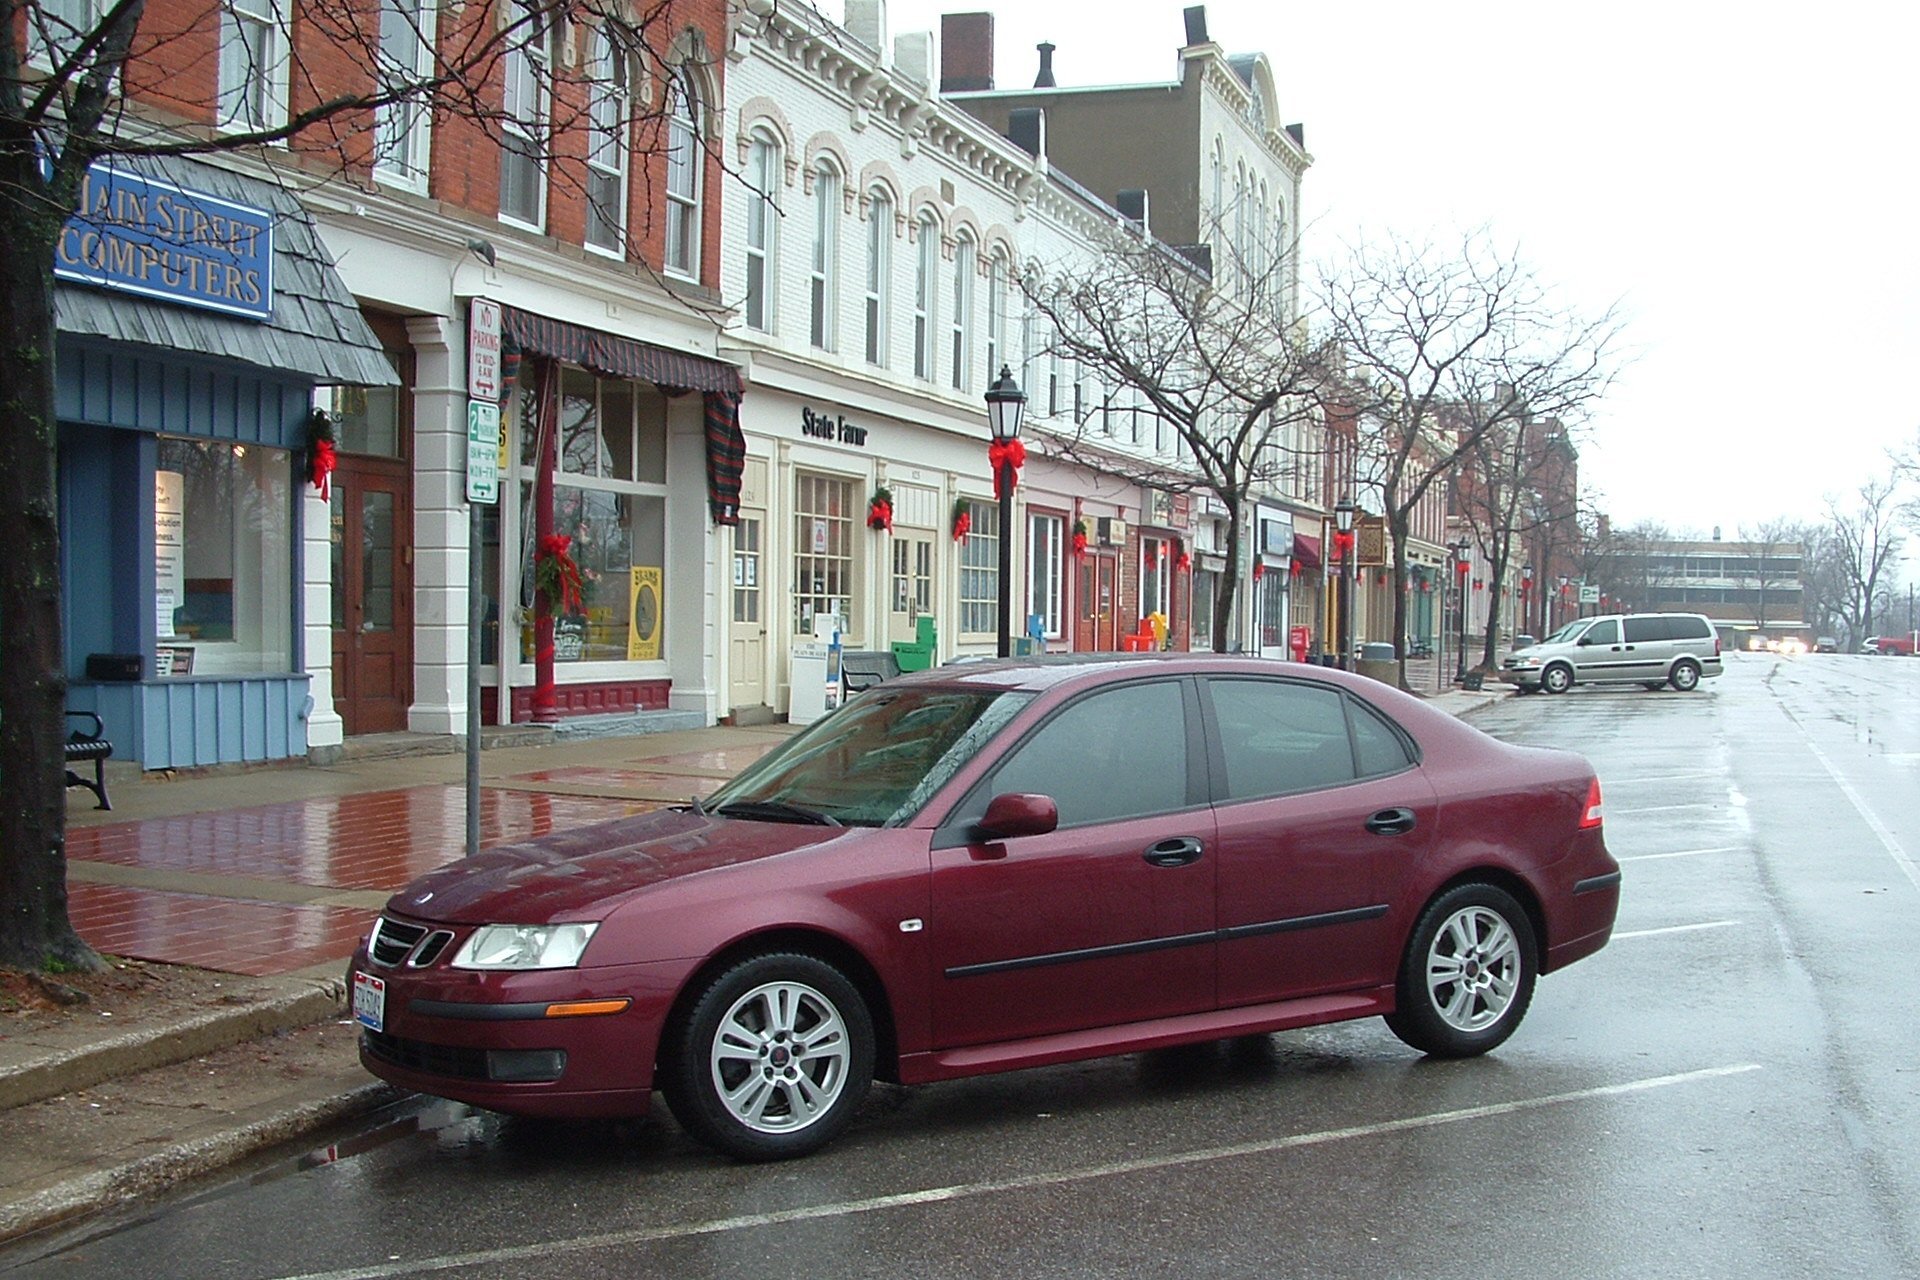 The square in CHARDON, Ohio, and Saab 9-3, December 2007